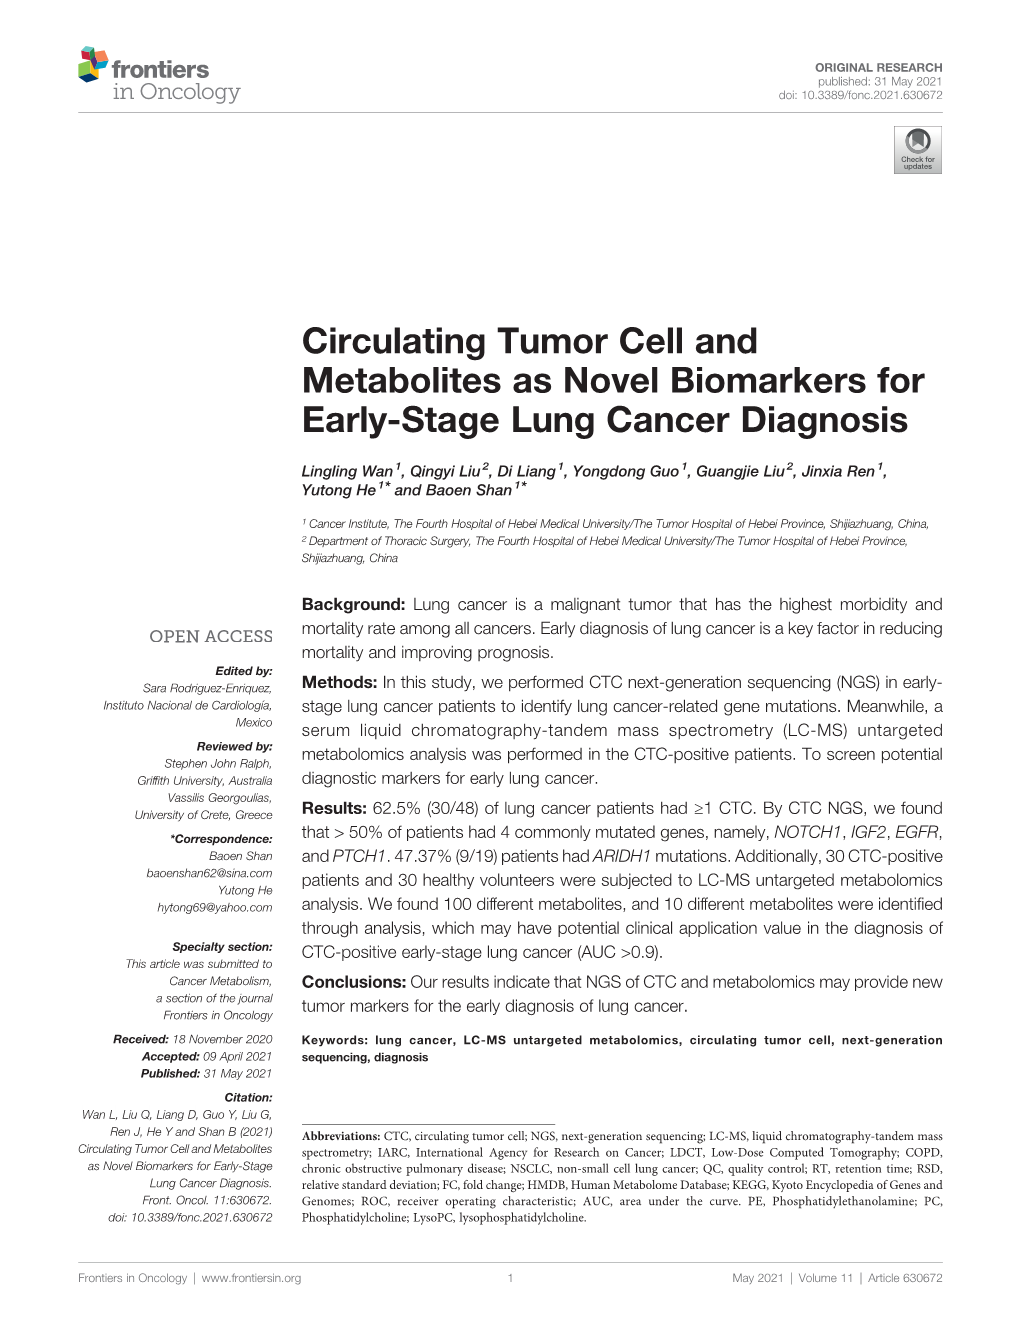 Circulating Tumor Cell and Metabolites As Novel Biomarkers for Early-Stage Lung Cancer Diagnosis